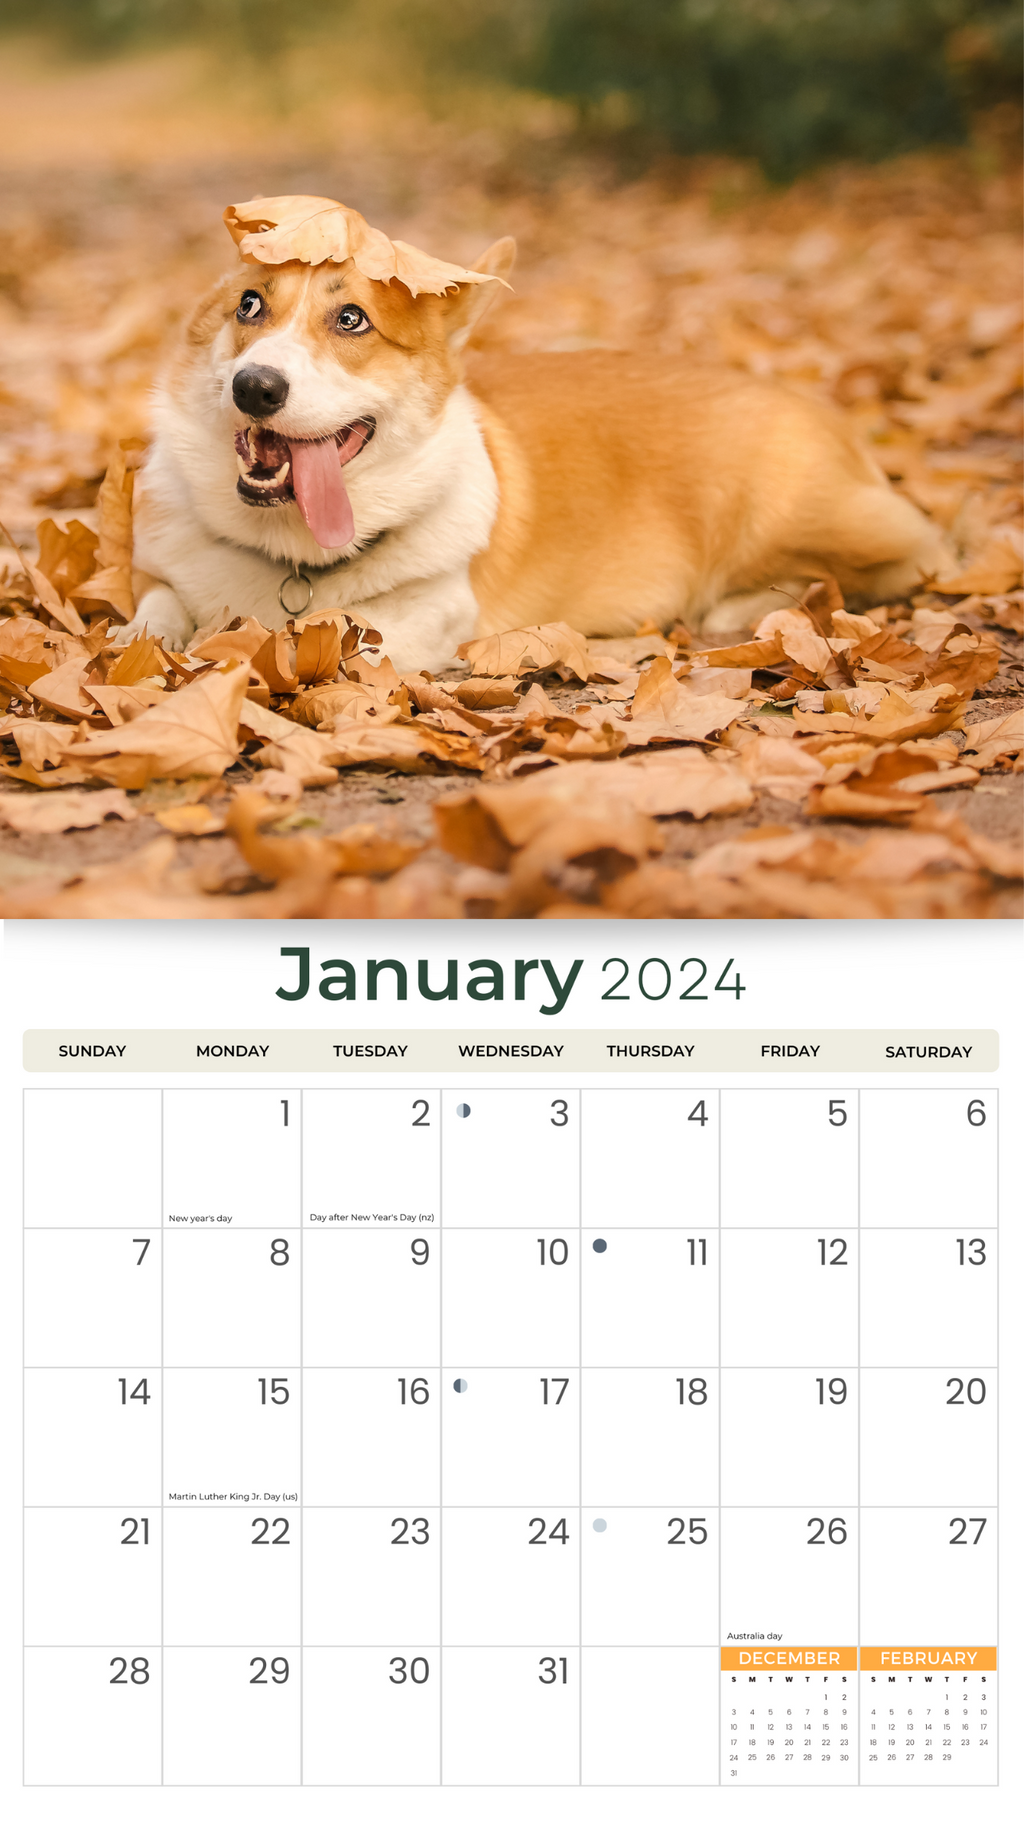 2024 Deluxe Wall Calendar Dogs & Puppies Calendars By Just